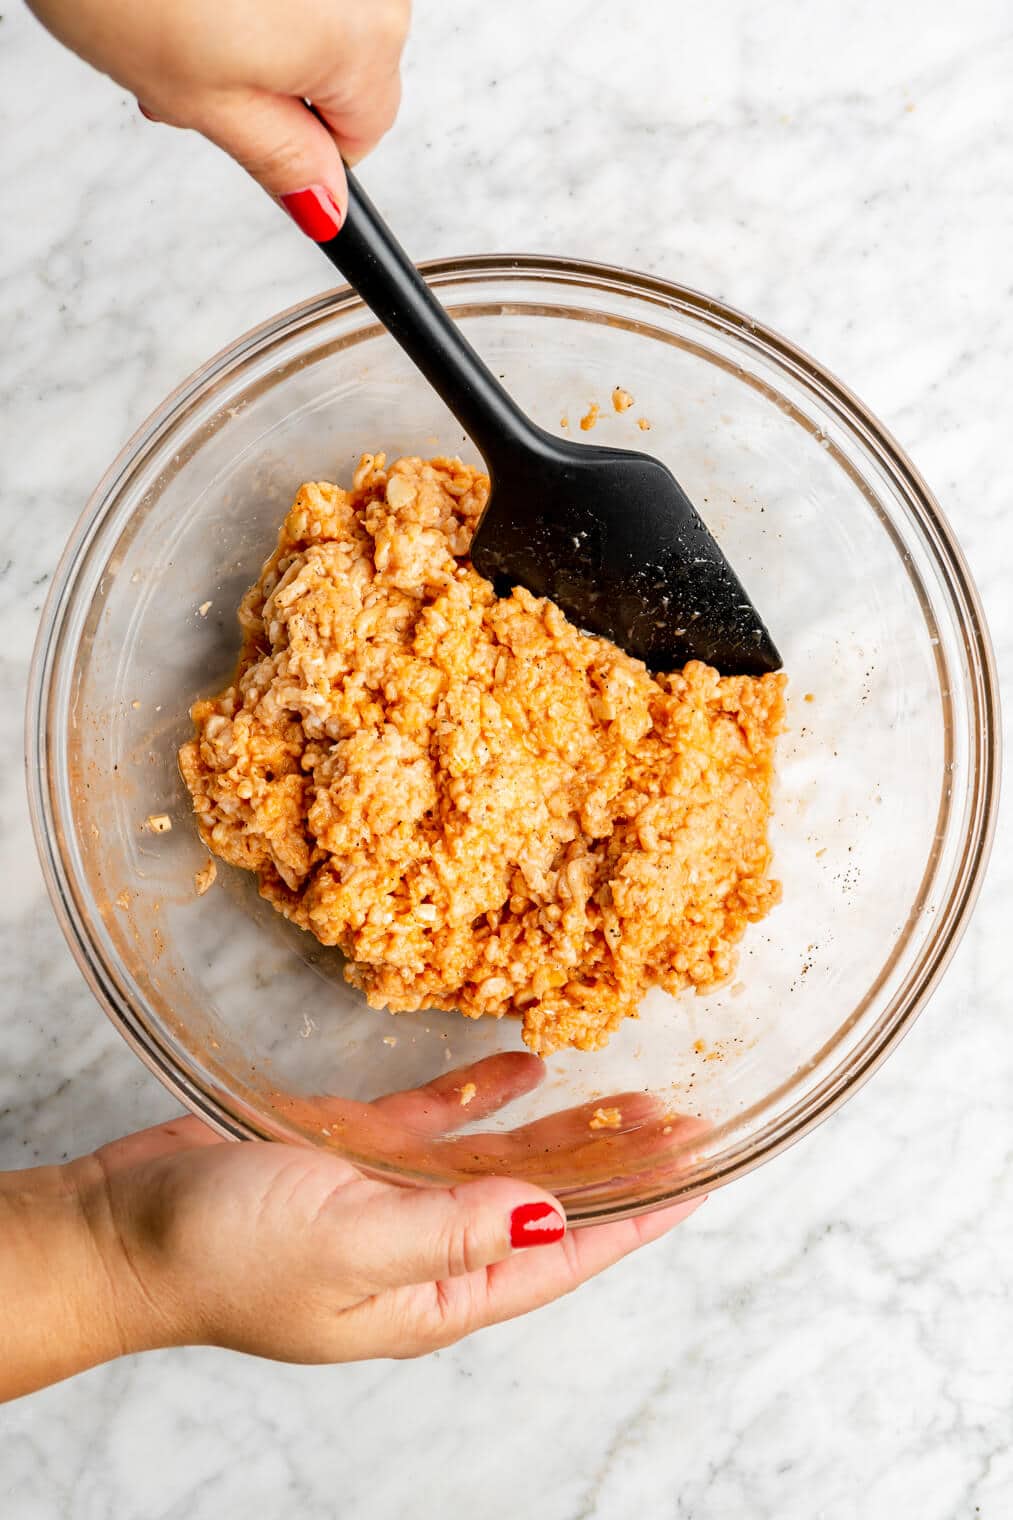 Hand holding a spatula stirring together a ground chicken mixture in a glass bowl.